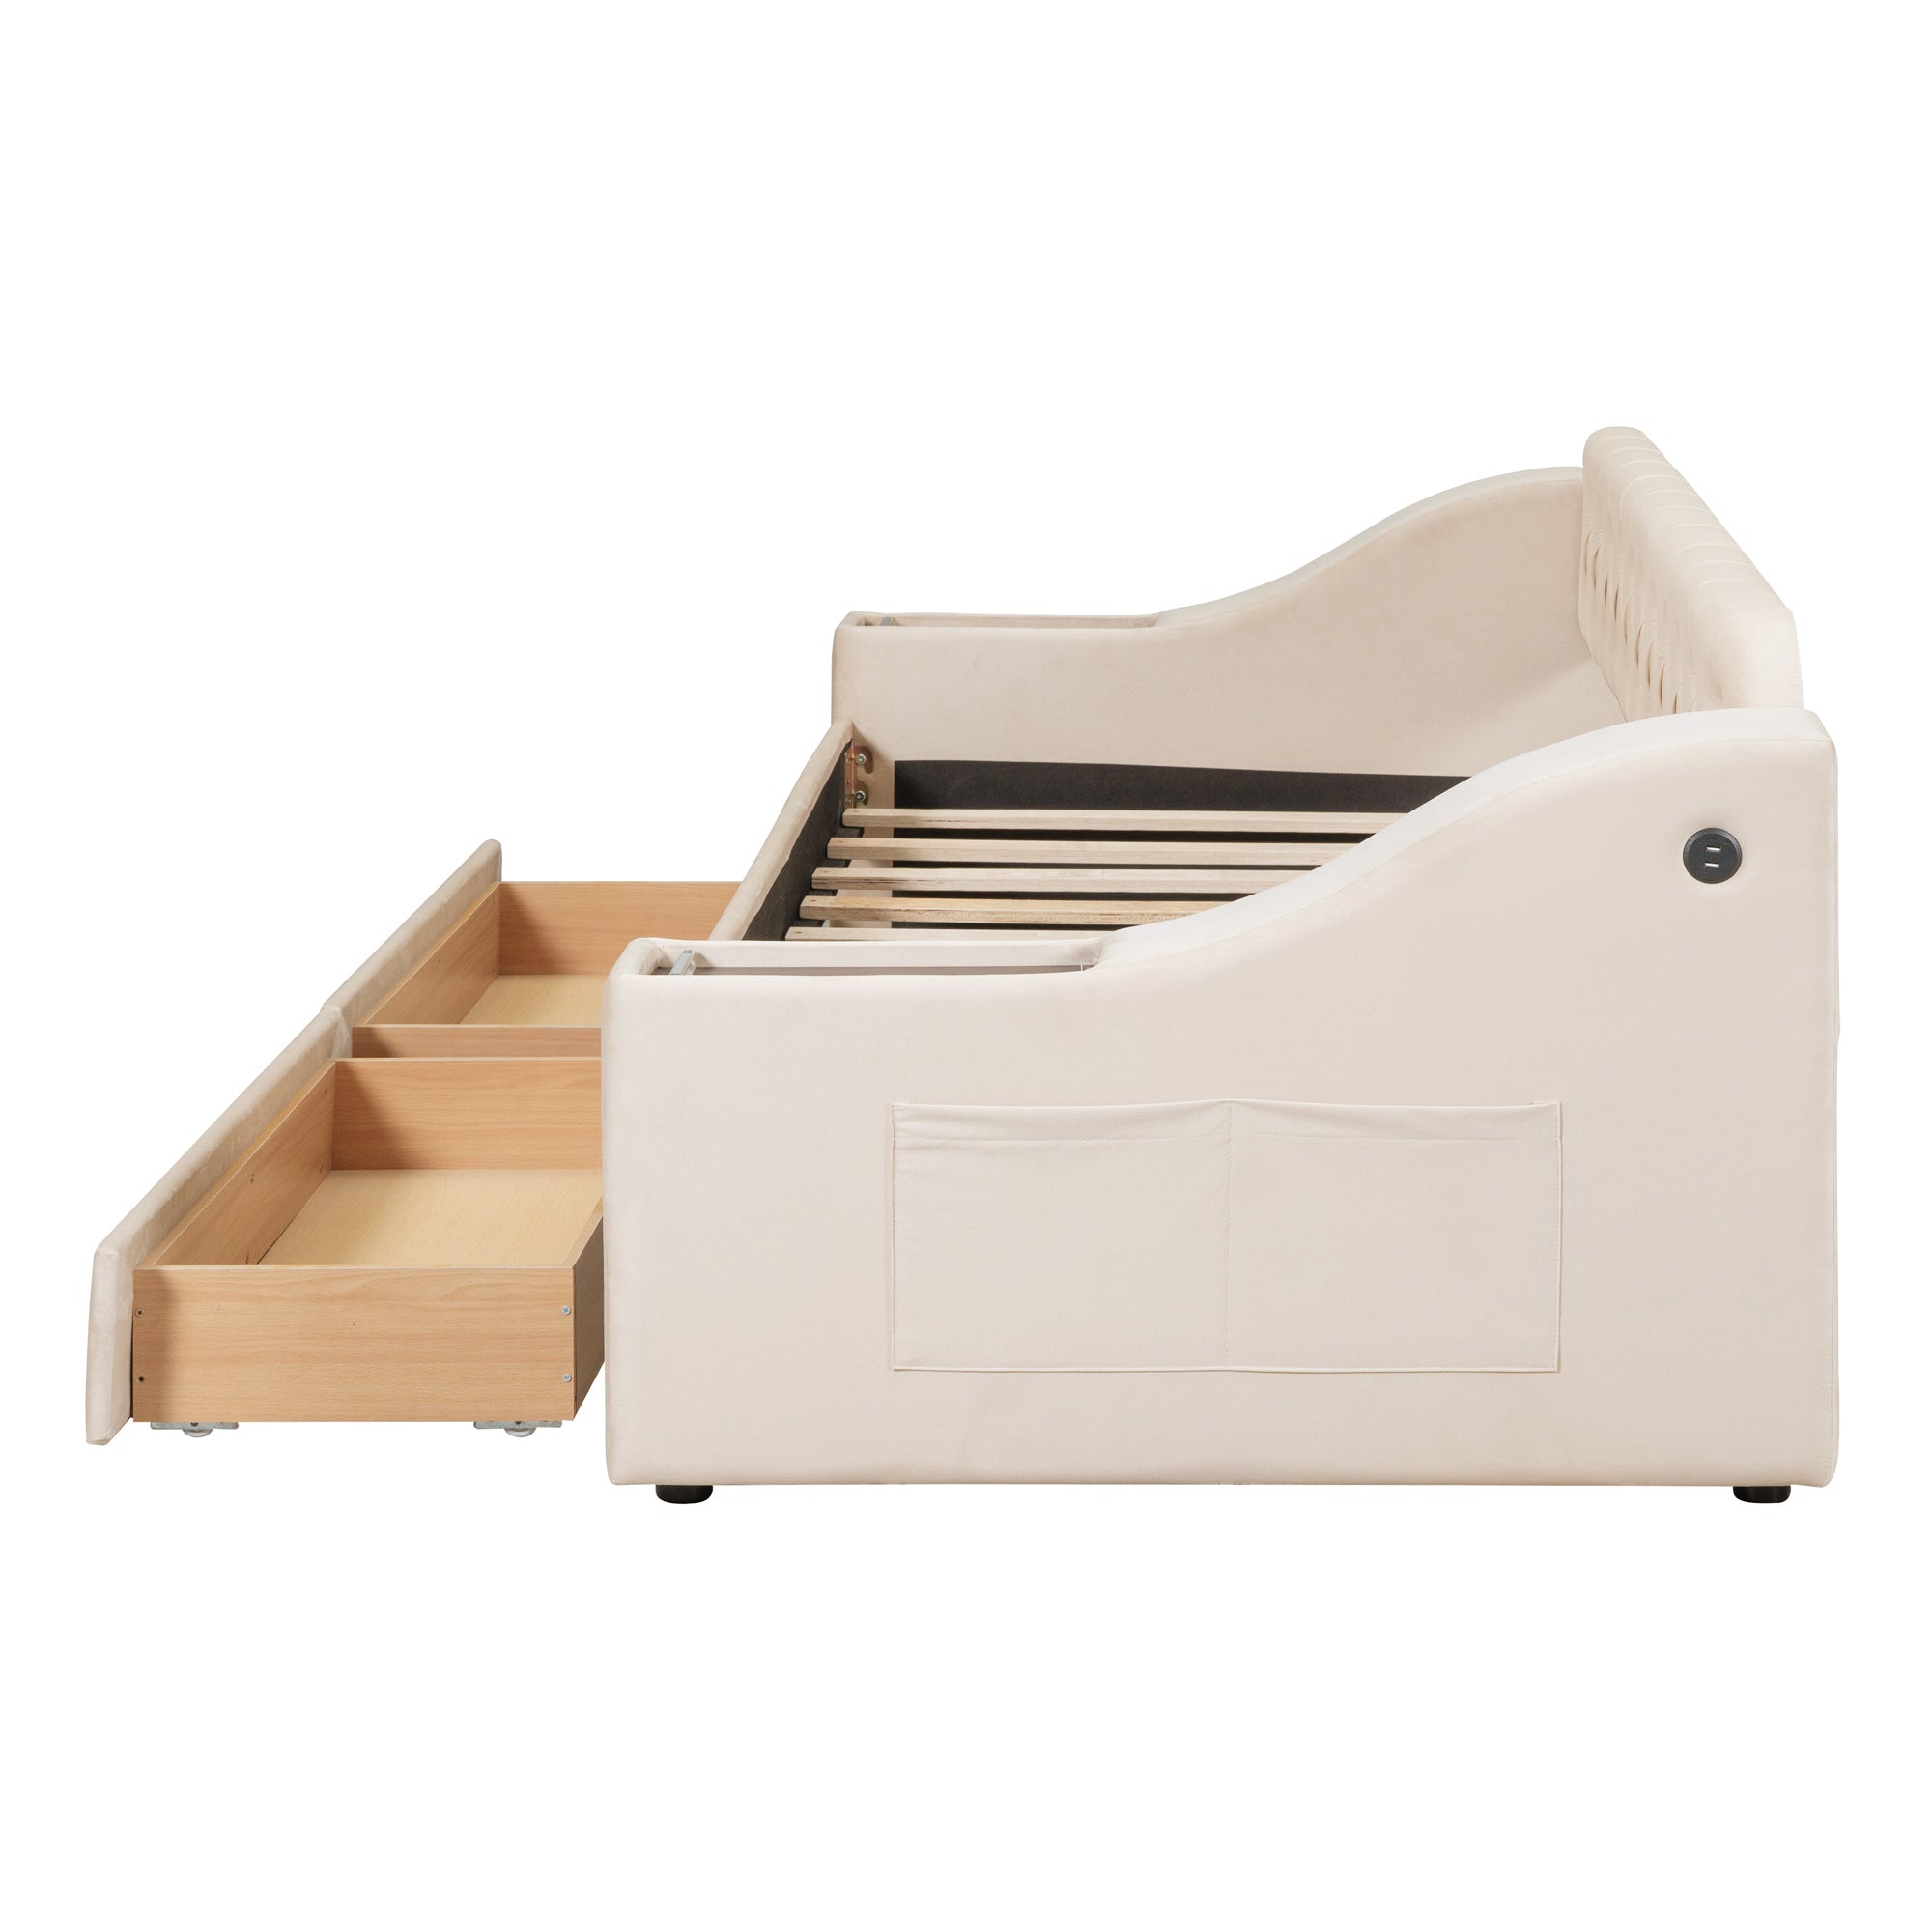 Twin Size Upholstered Daybed with Storage Armrests and USB Port - Beige